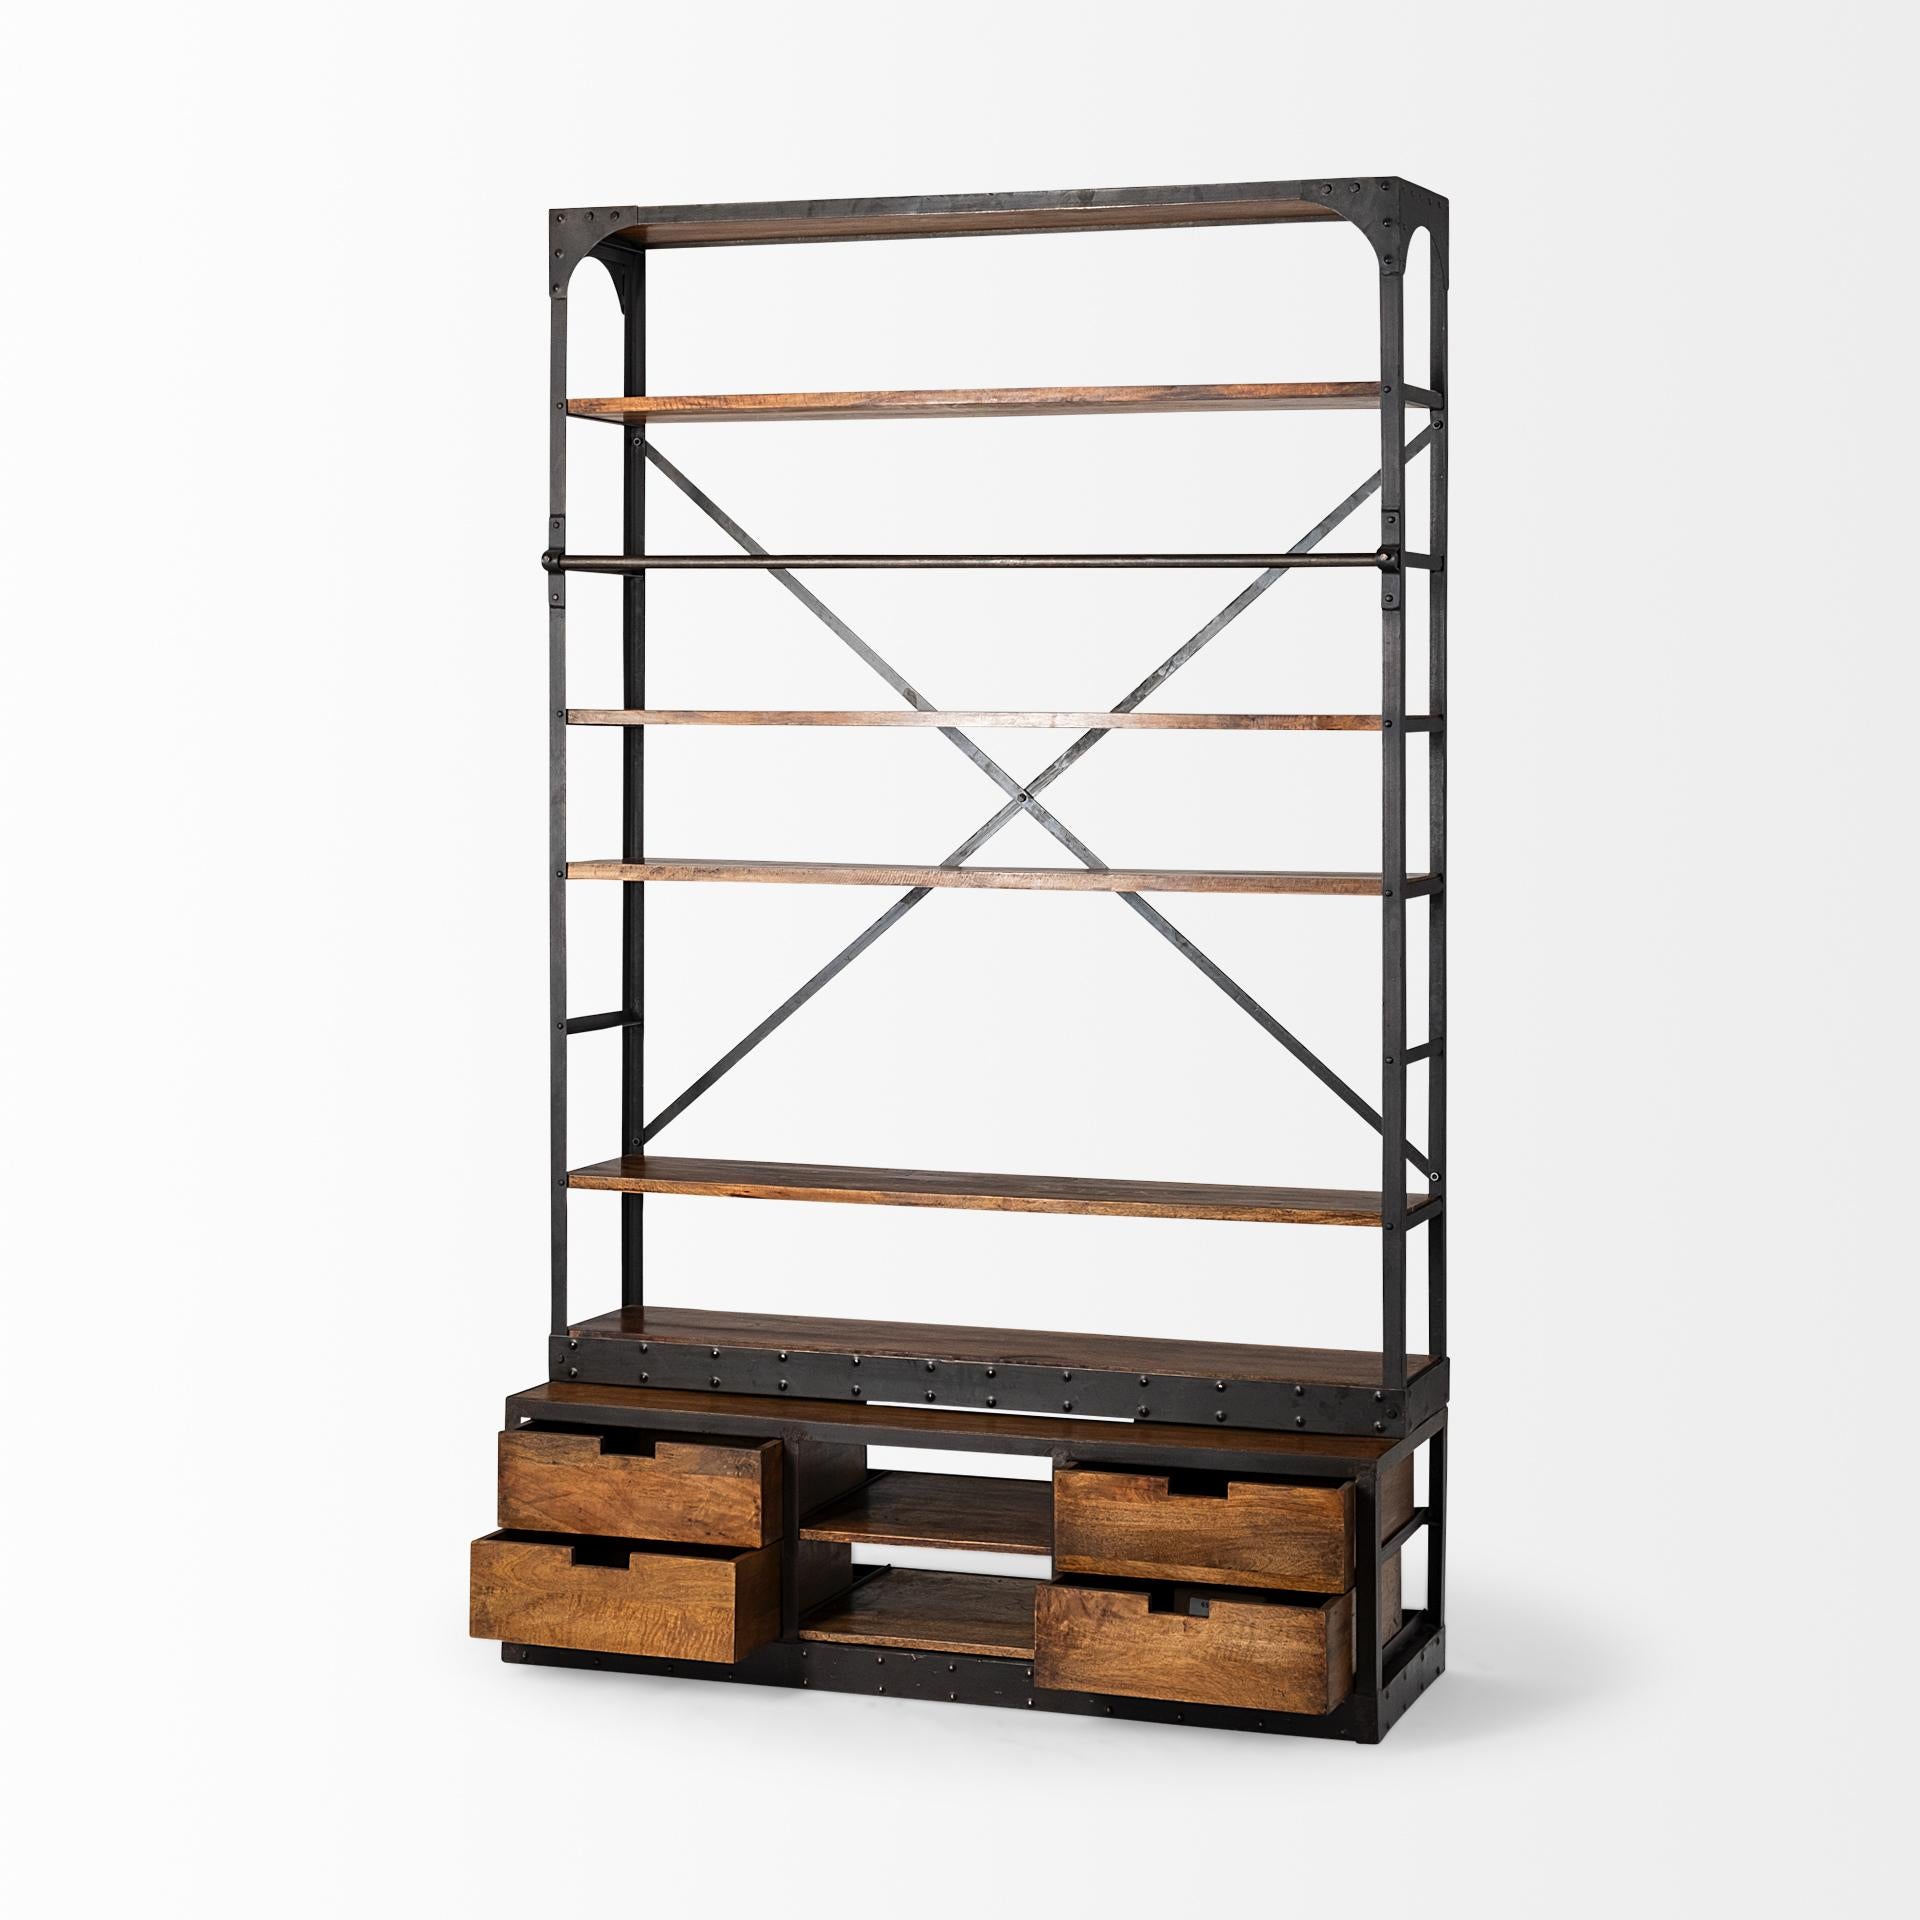 Medium Brown Wood Shelving Unit with Copper Ladder and 4 Shelves